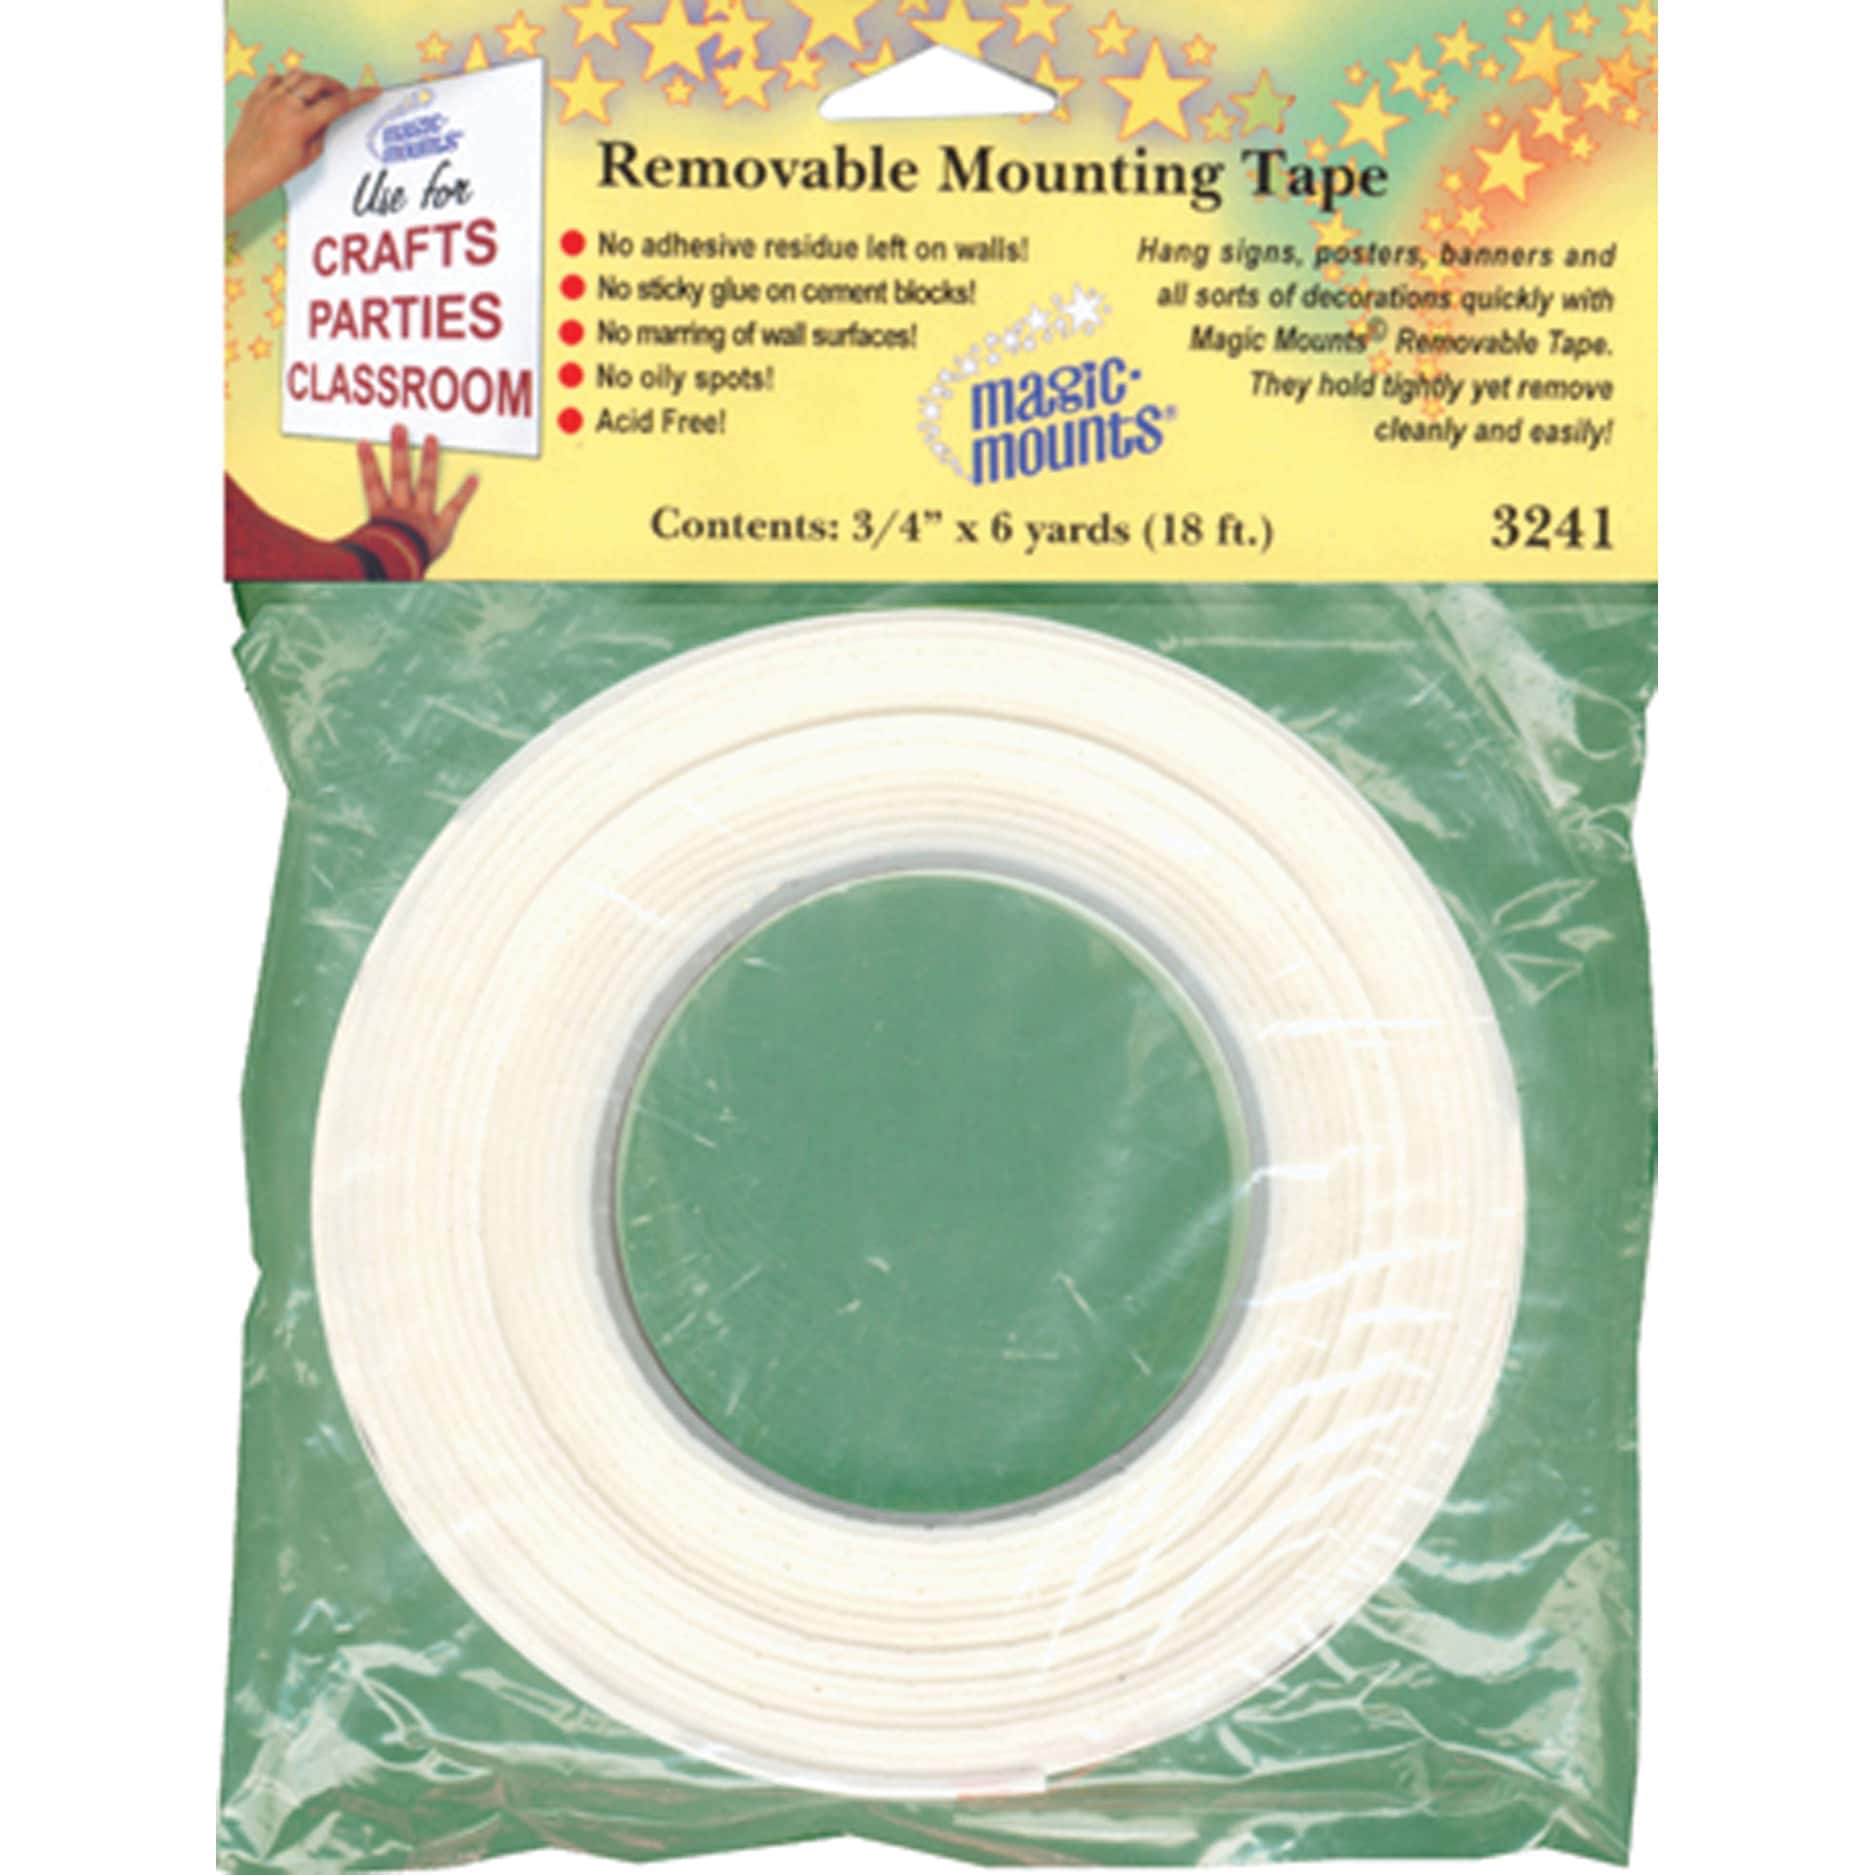 Removable Tape for Residue-free Bonding on Walls, Glass, & Other